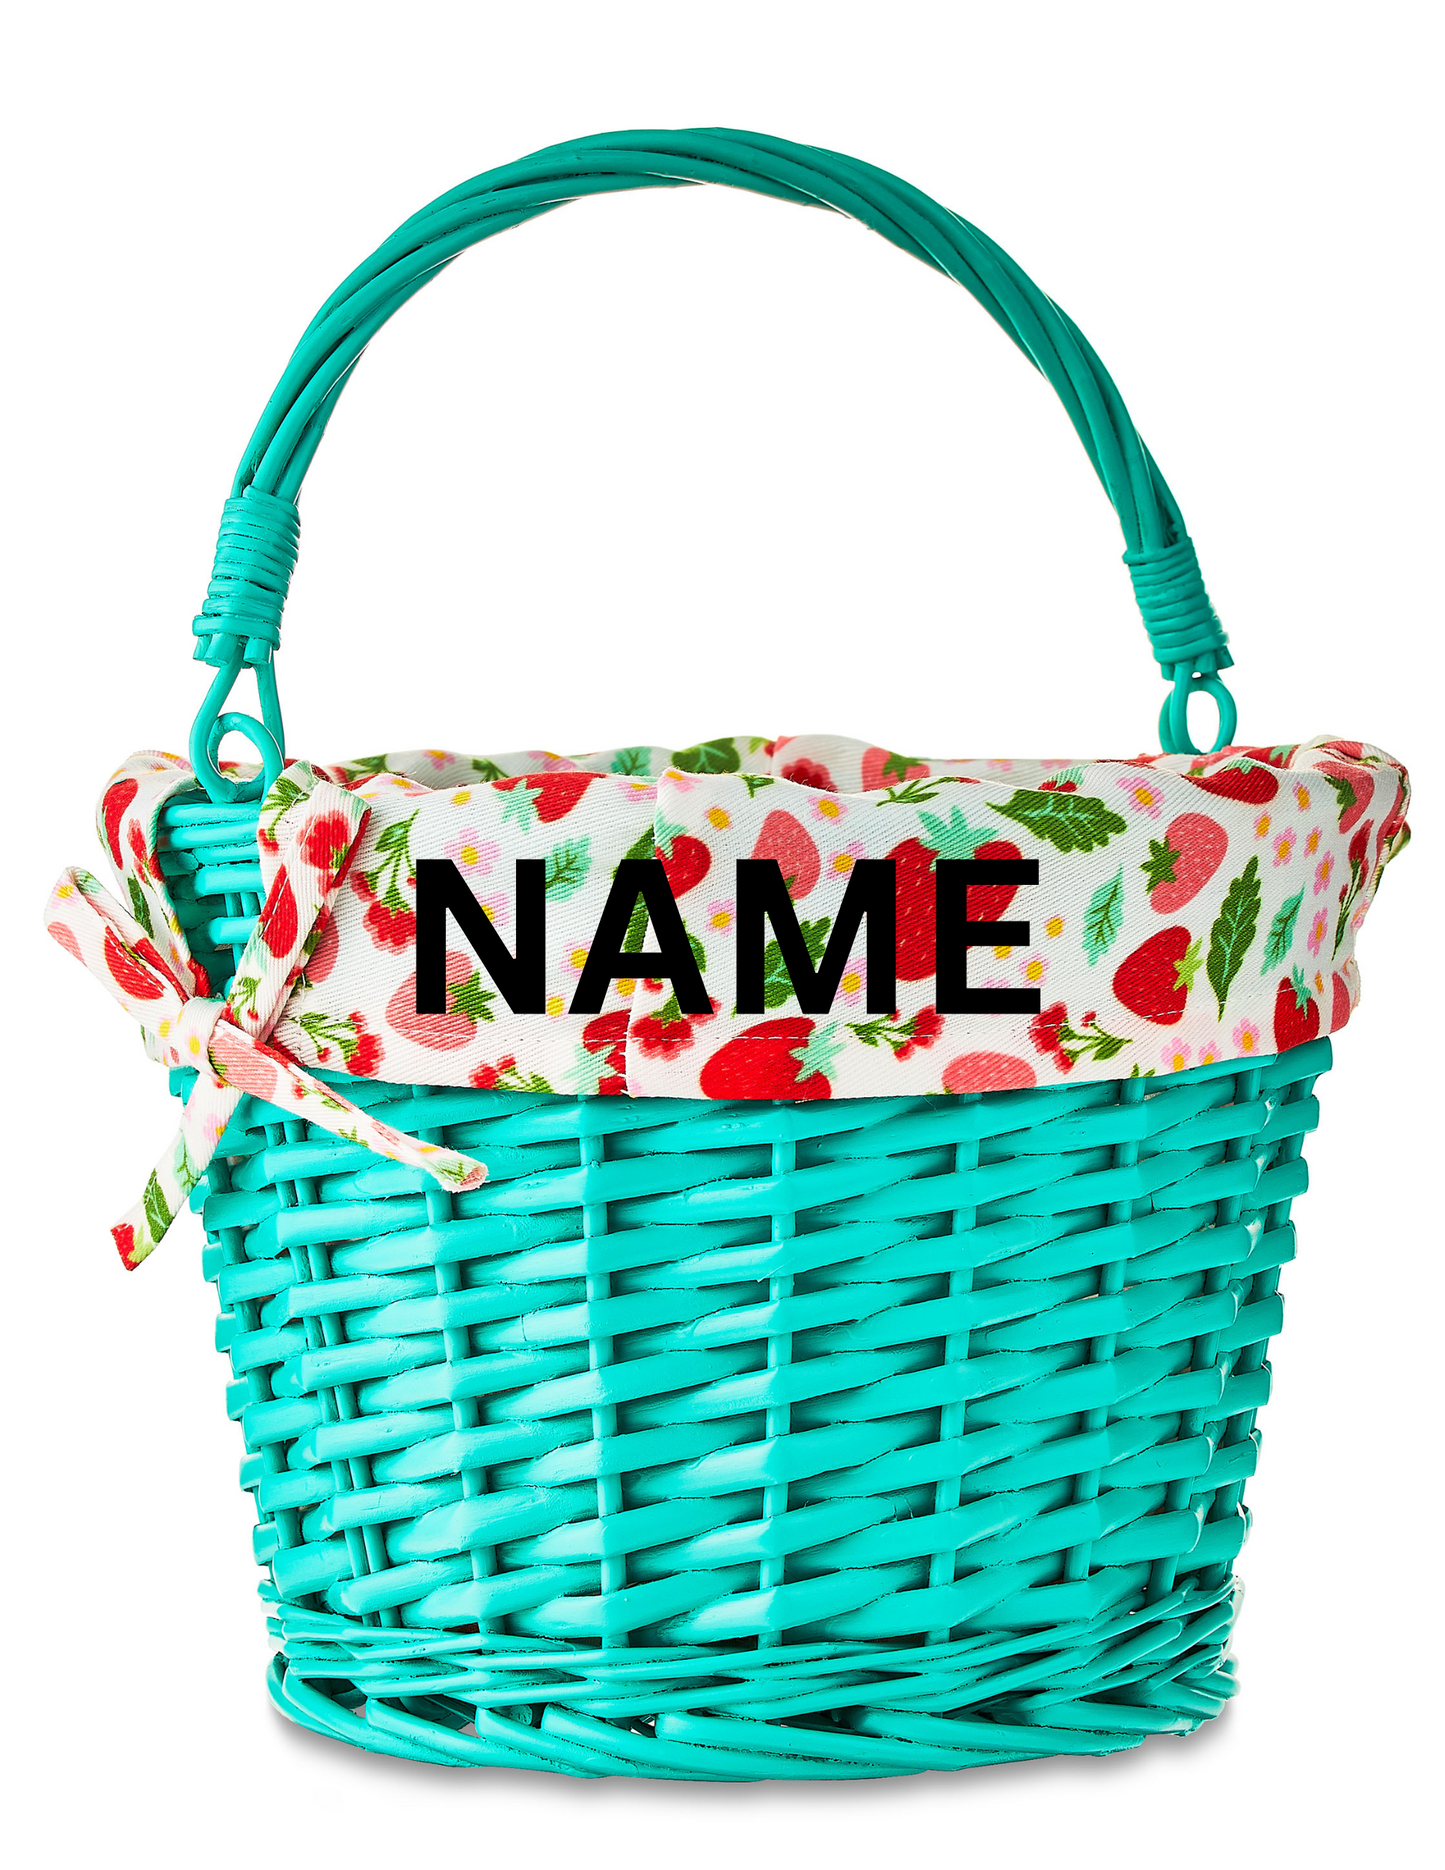 Personalized Embroidered Easter Basket Strawberry Liner